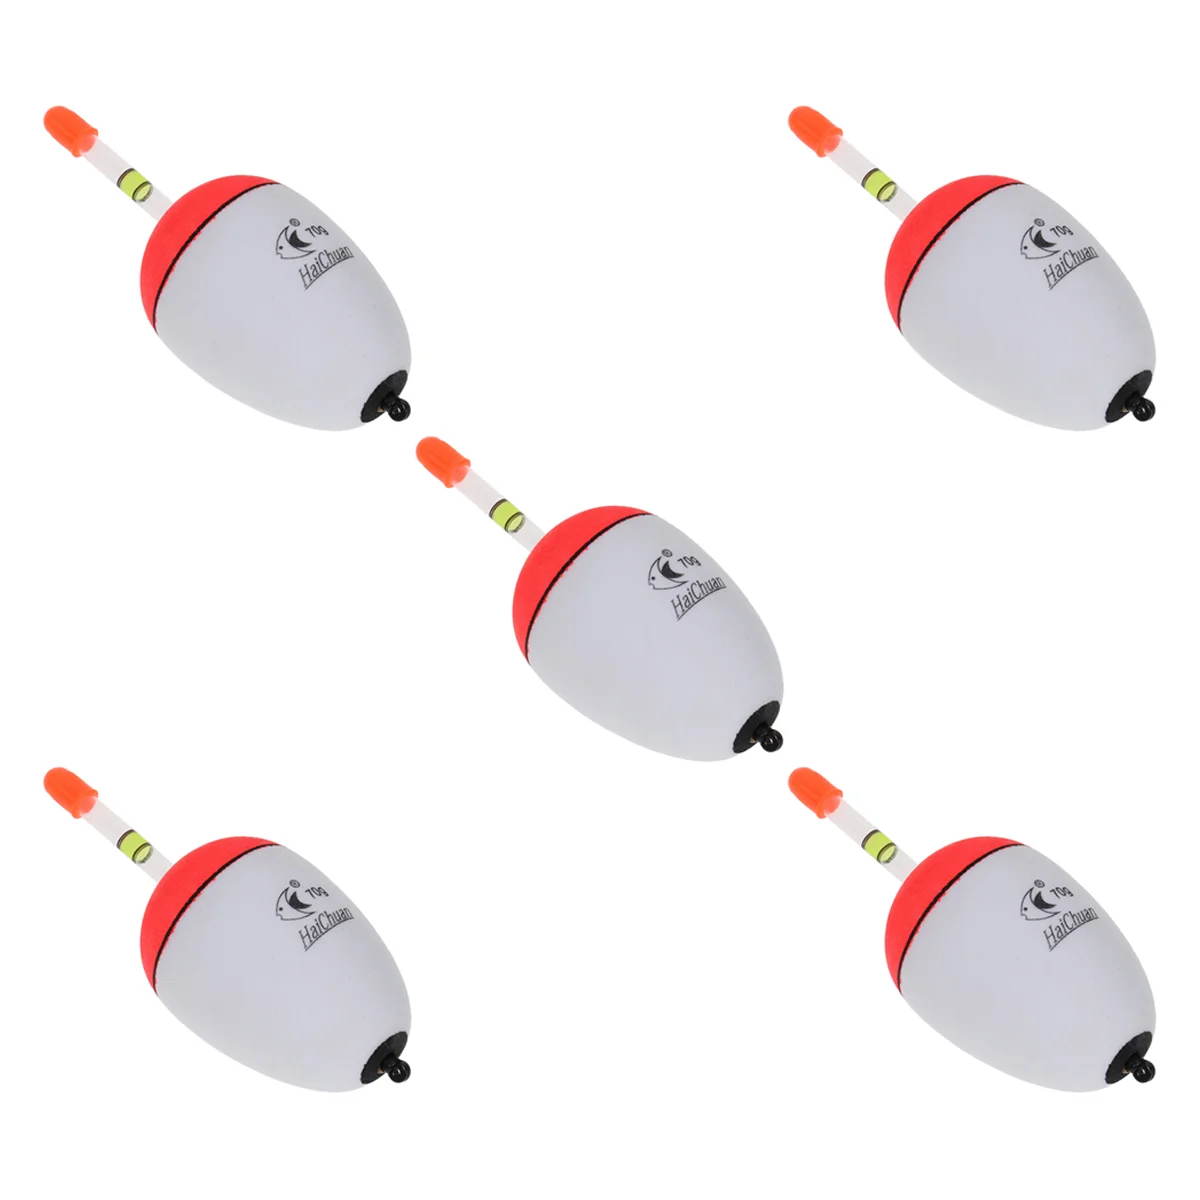 

5 Pcs 70g Sea Fishing Floating Floats Can Be Inserted Luminous Sticks Pole Belly Fishing (White)